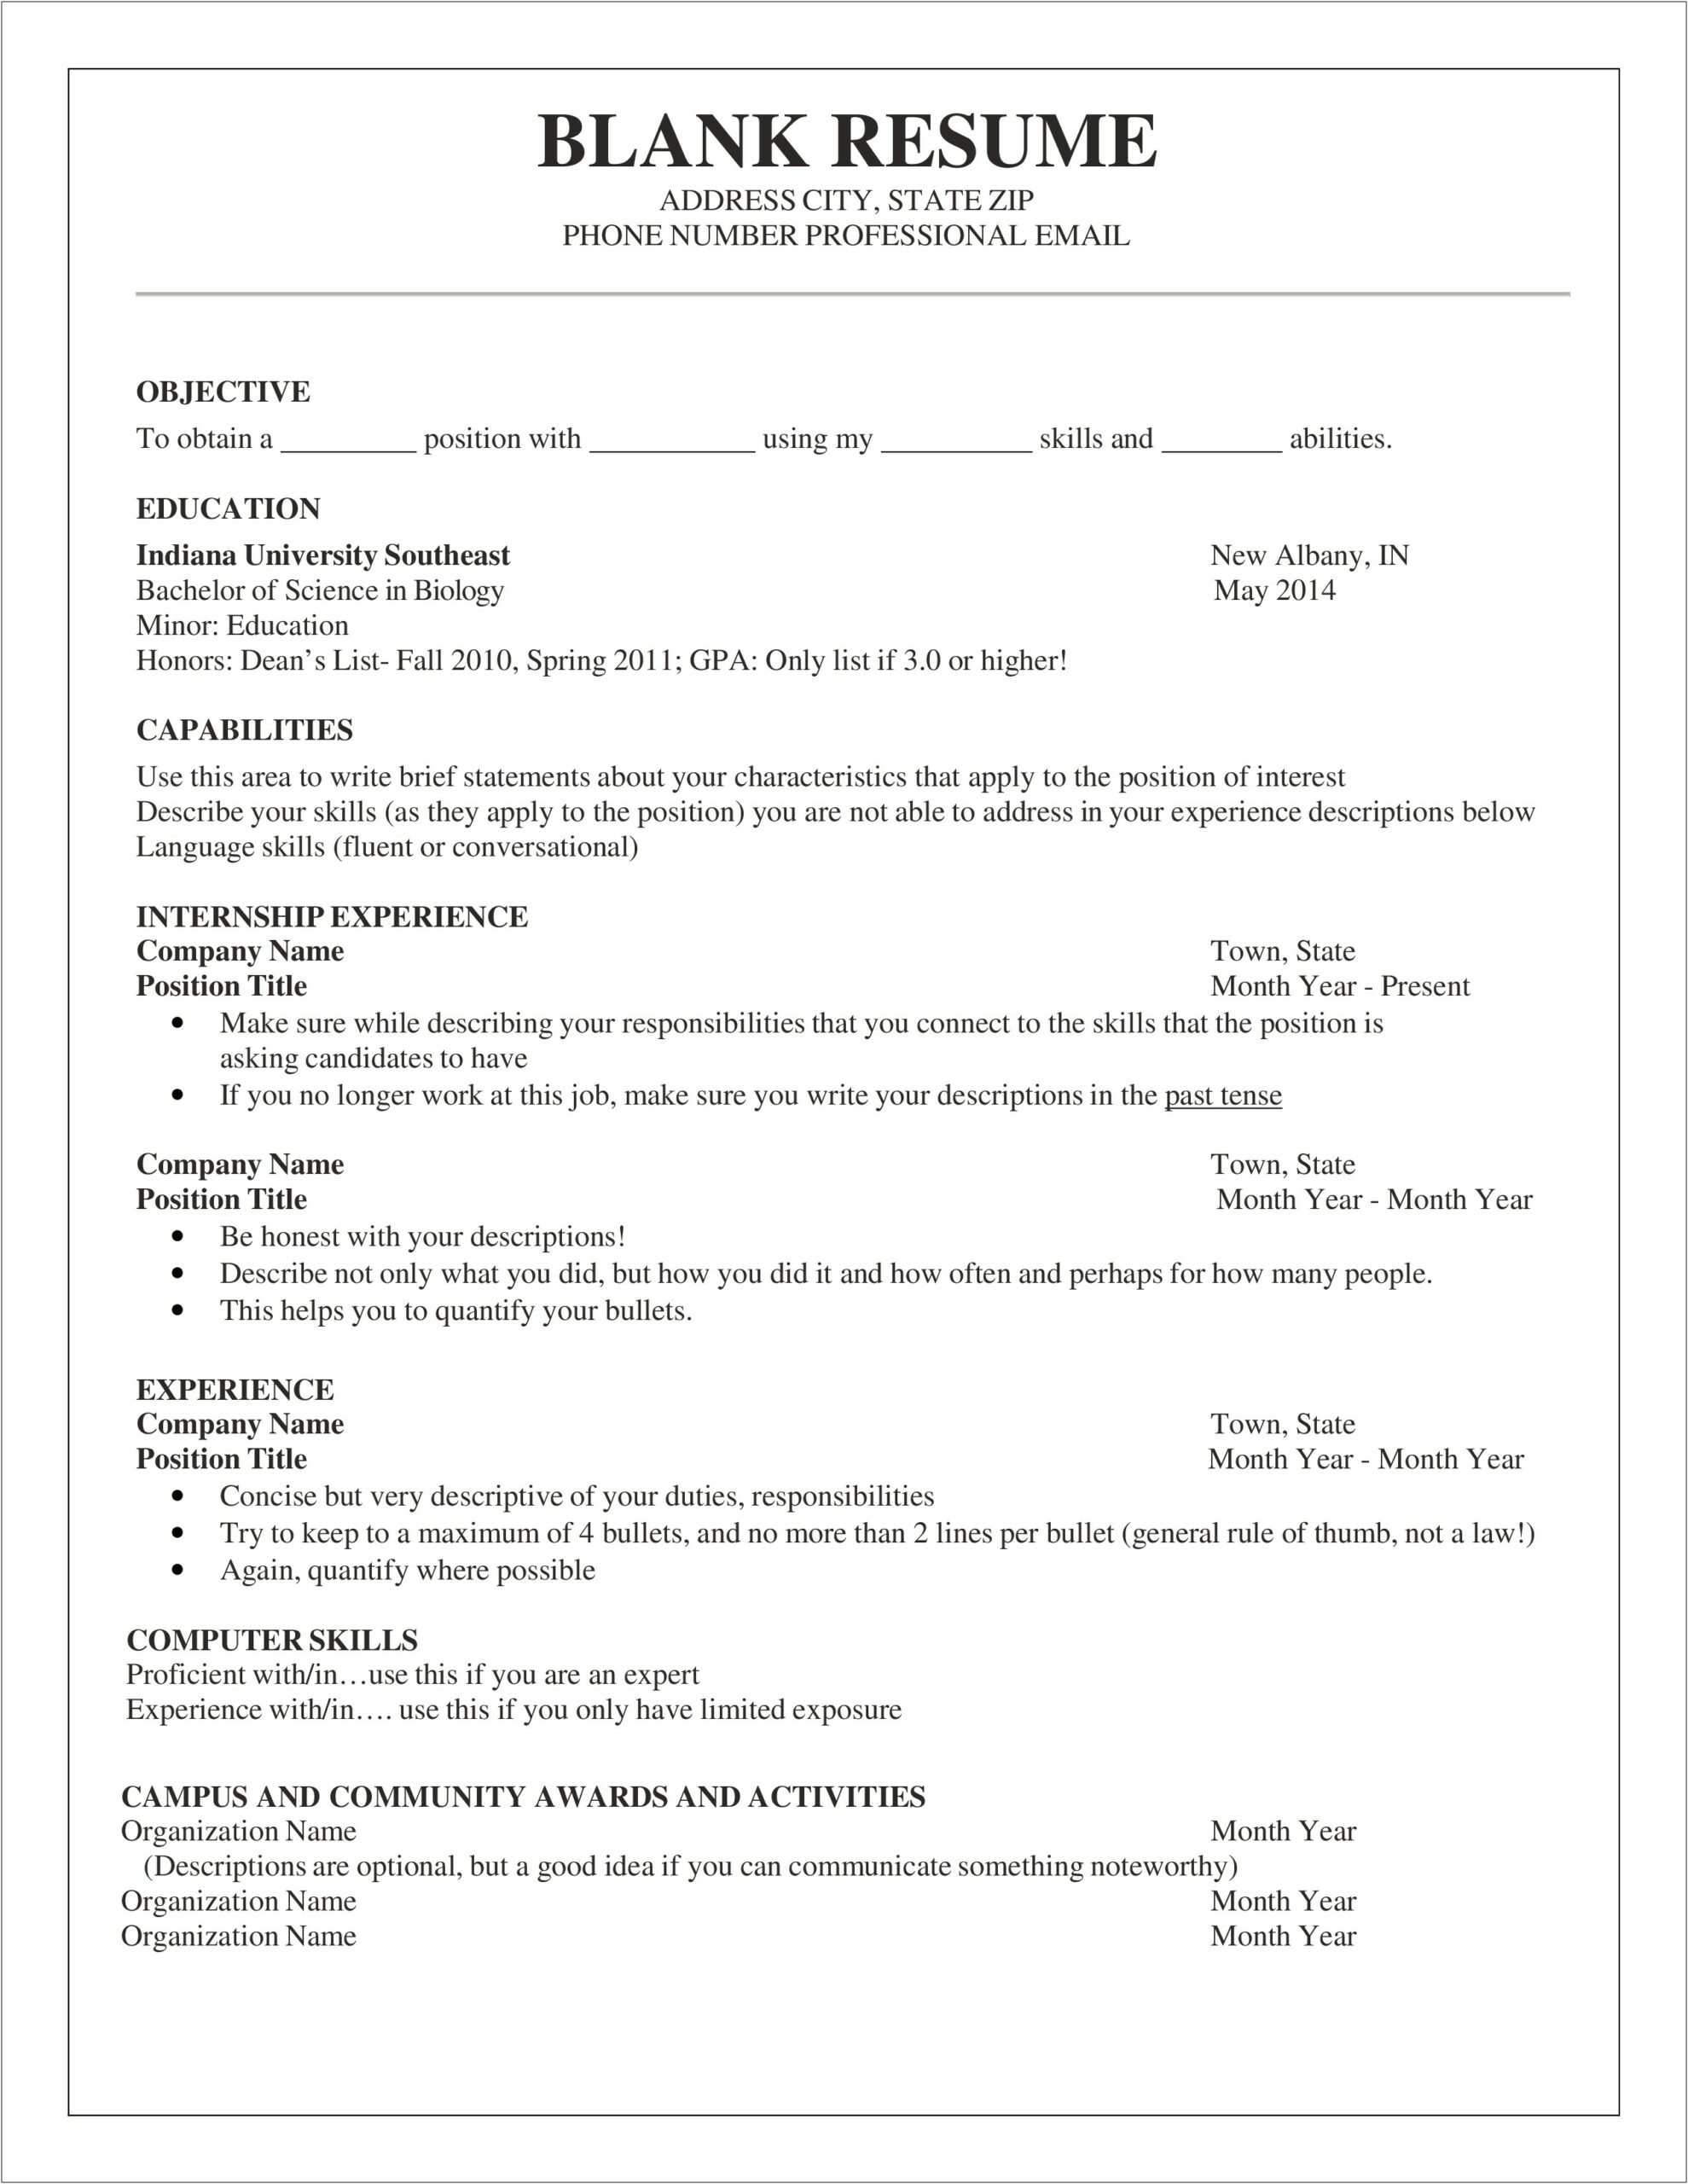 Professional Skills In Biology For Resume